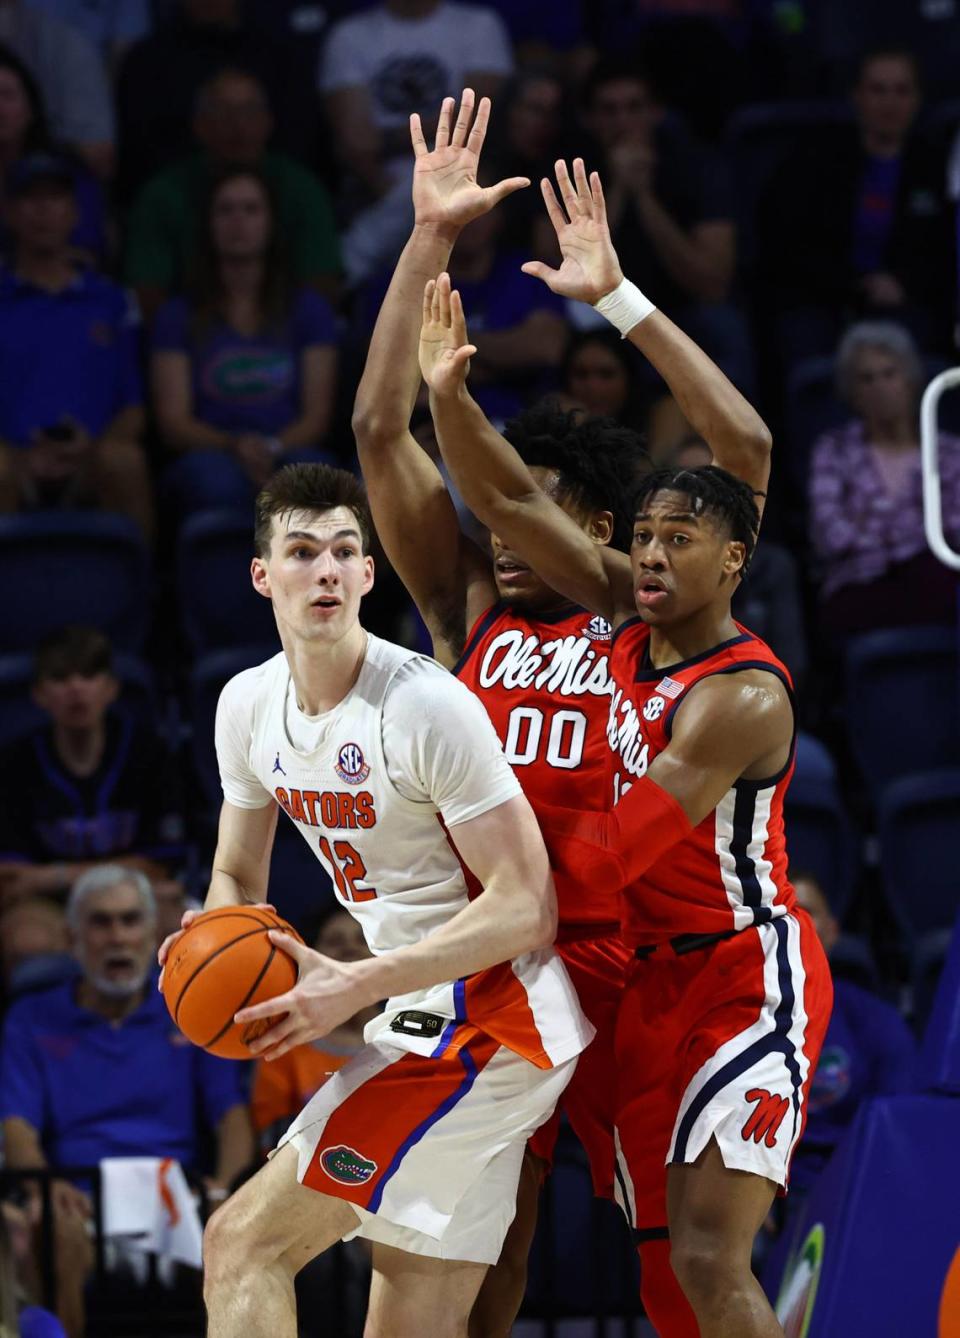 Florida Gators forward Colin Castleton (12) passes the ball as Mississippi Rebels guard Matthew Murrell (11) and Mississippi Rebels forward Jayveous McKinnis (00) defend during the first half Feb. 15, 2023, at Exactech Arena in Gainesville, Florida.